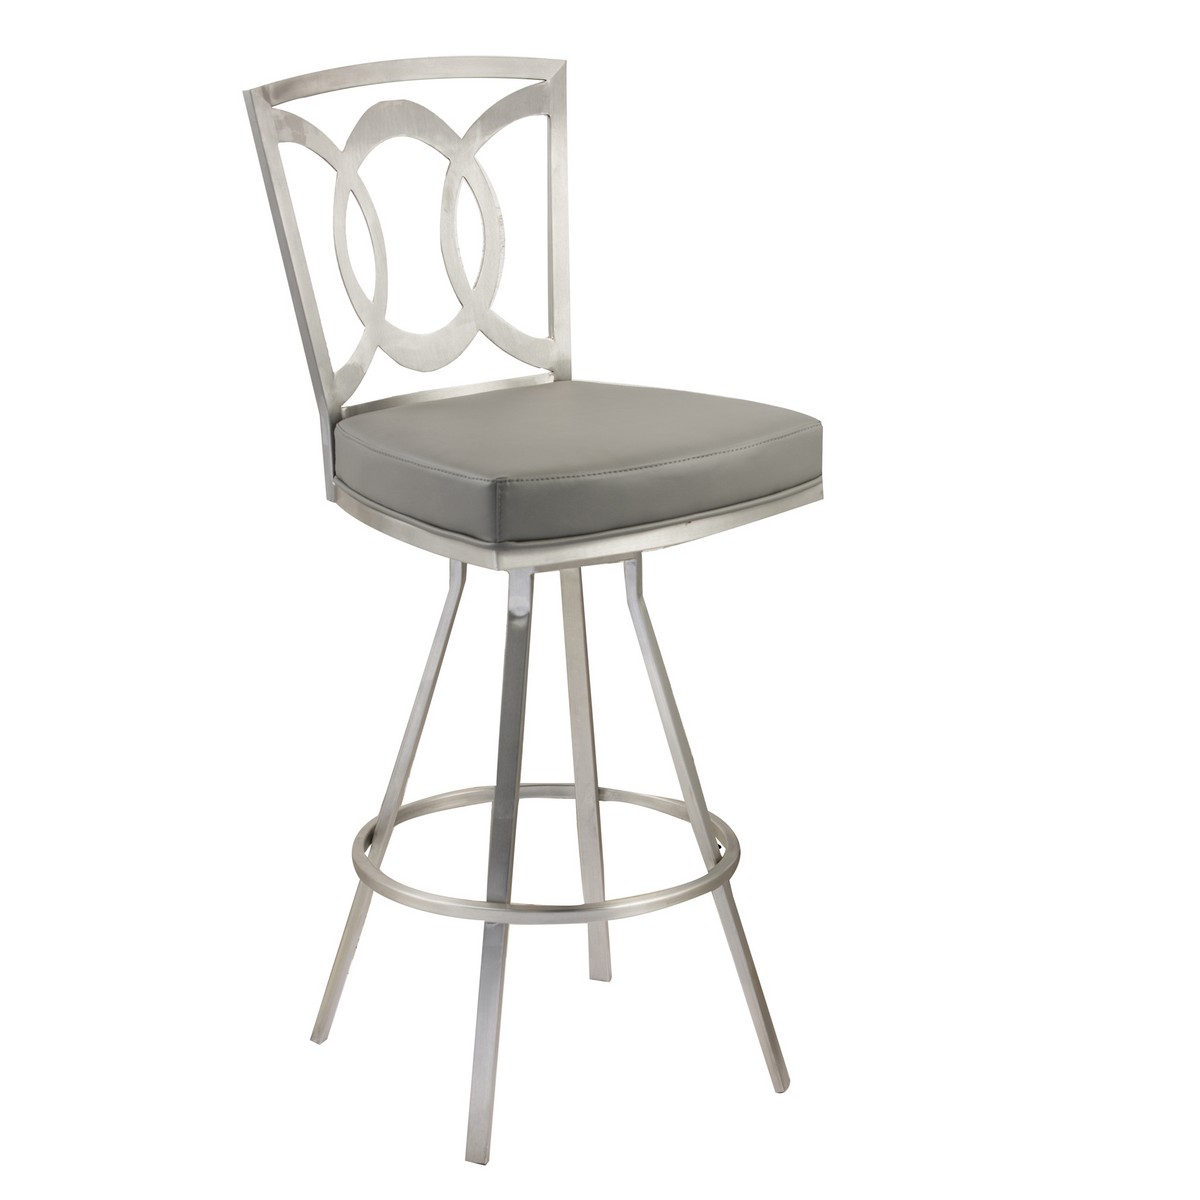 Armen Living Drake 26-inch Contemporary Swivel Barstool In Gray and Stainless Steel